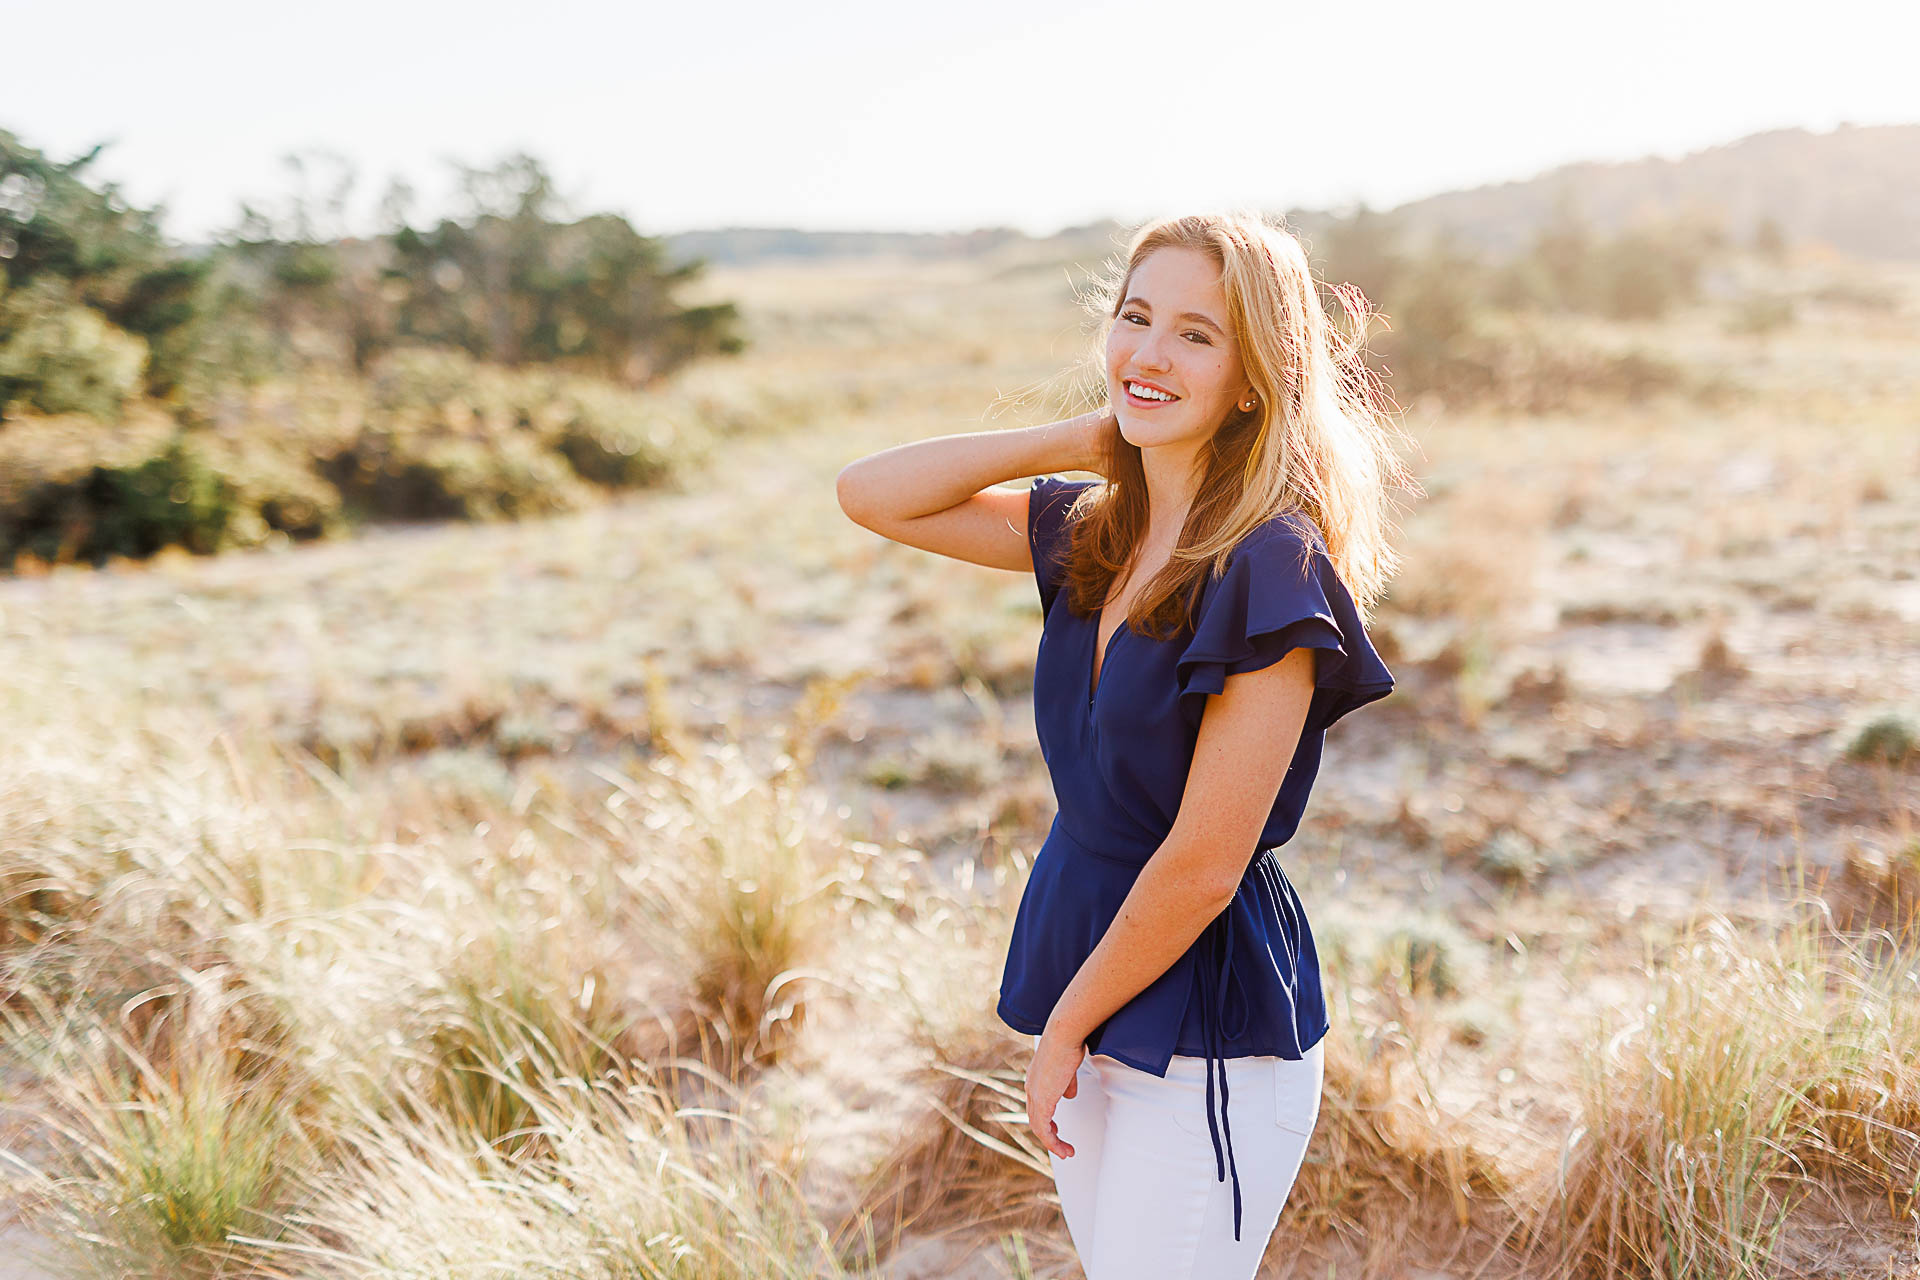 Photo by Cohasset senior photographer Christina Runnals | High school senior girl standing in beach grass and laughing